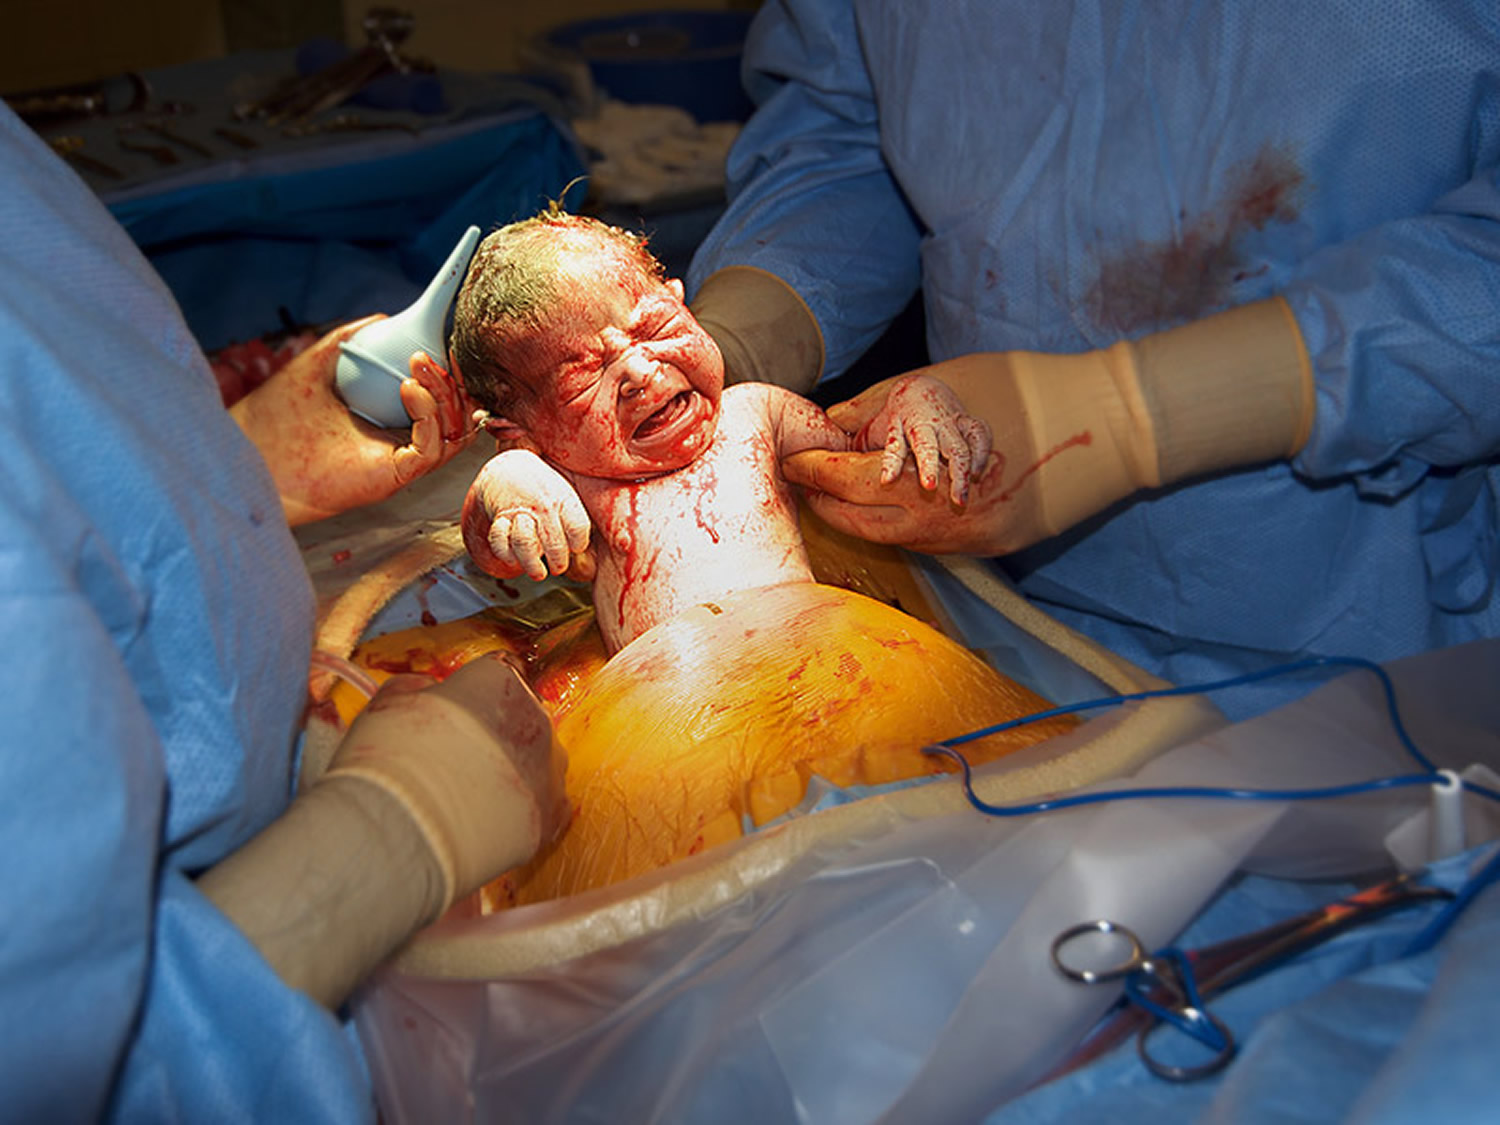 C - section - Cesarean delivery in live (Full) 